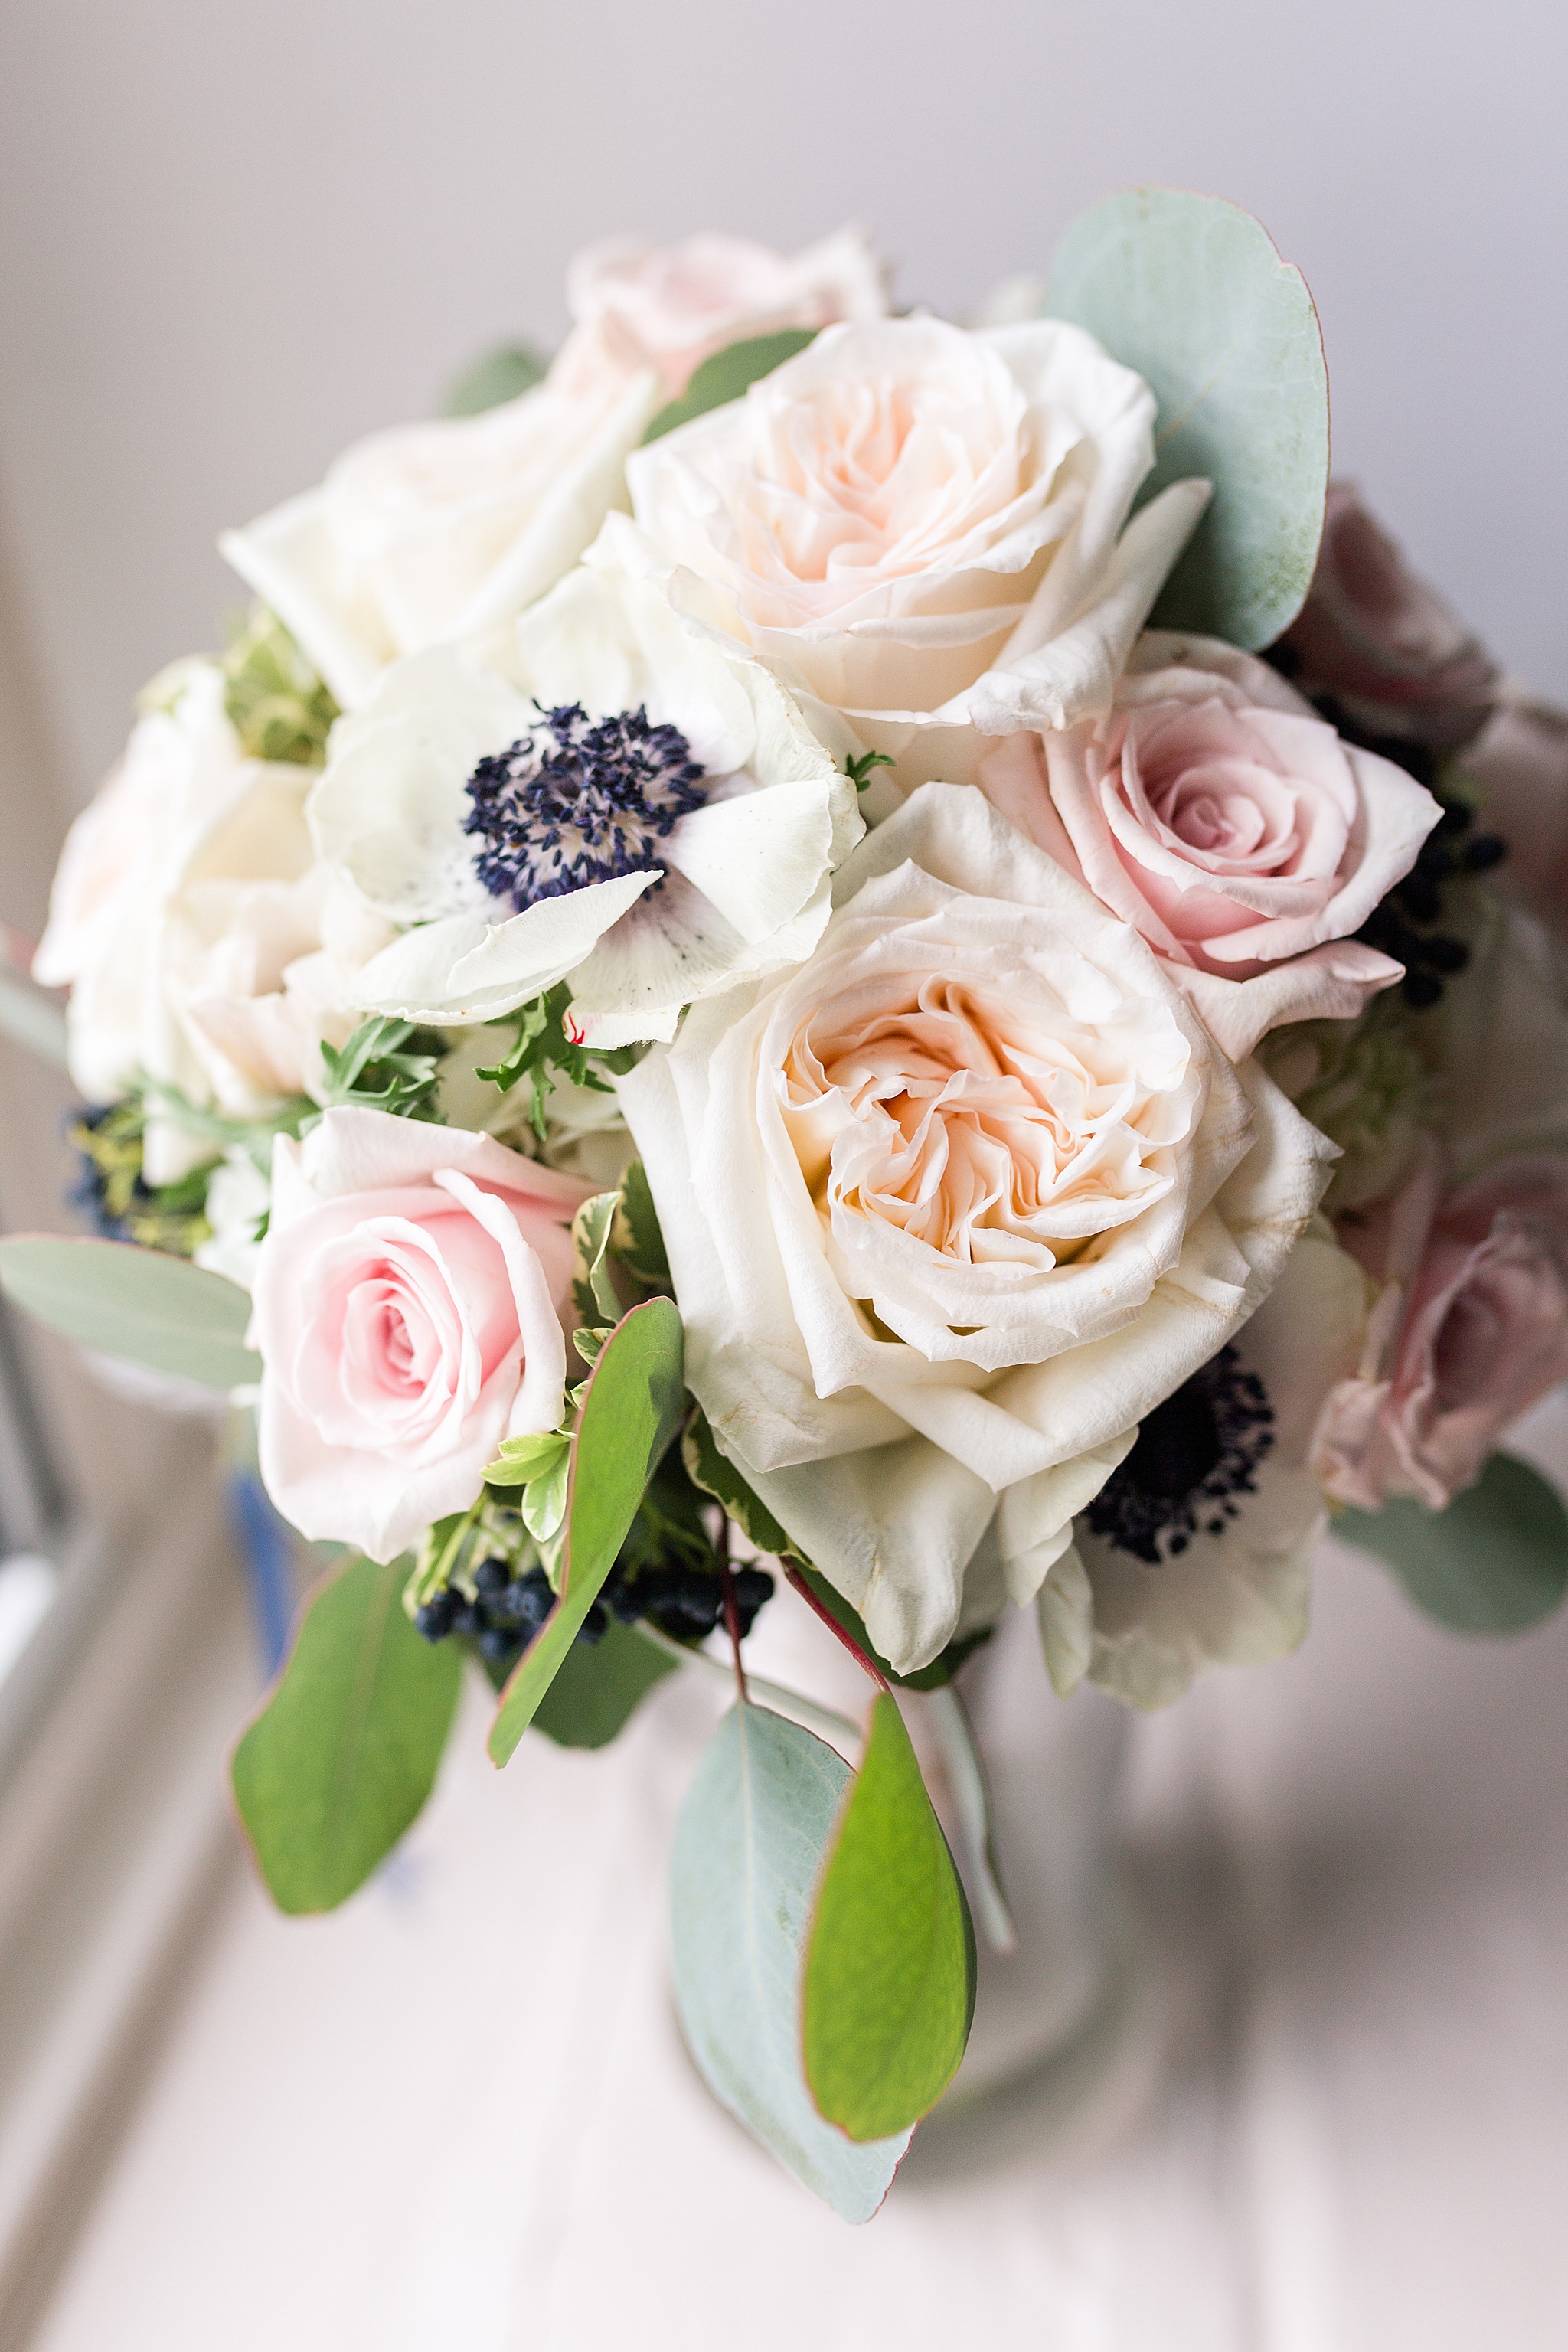 wedding bouquet for brunch wedding photographed by Alexandra Mandato Photography